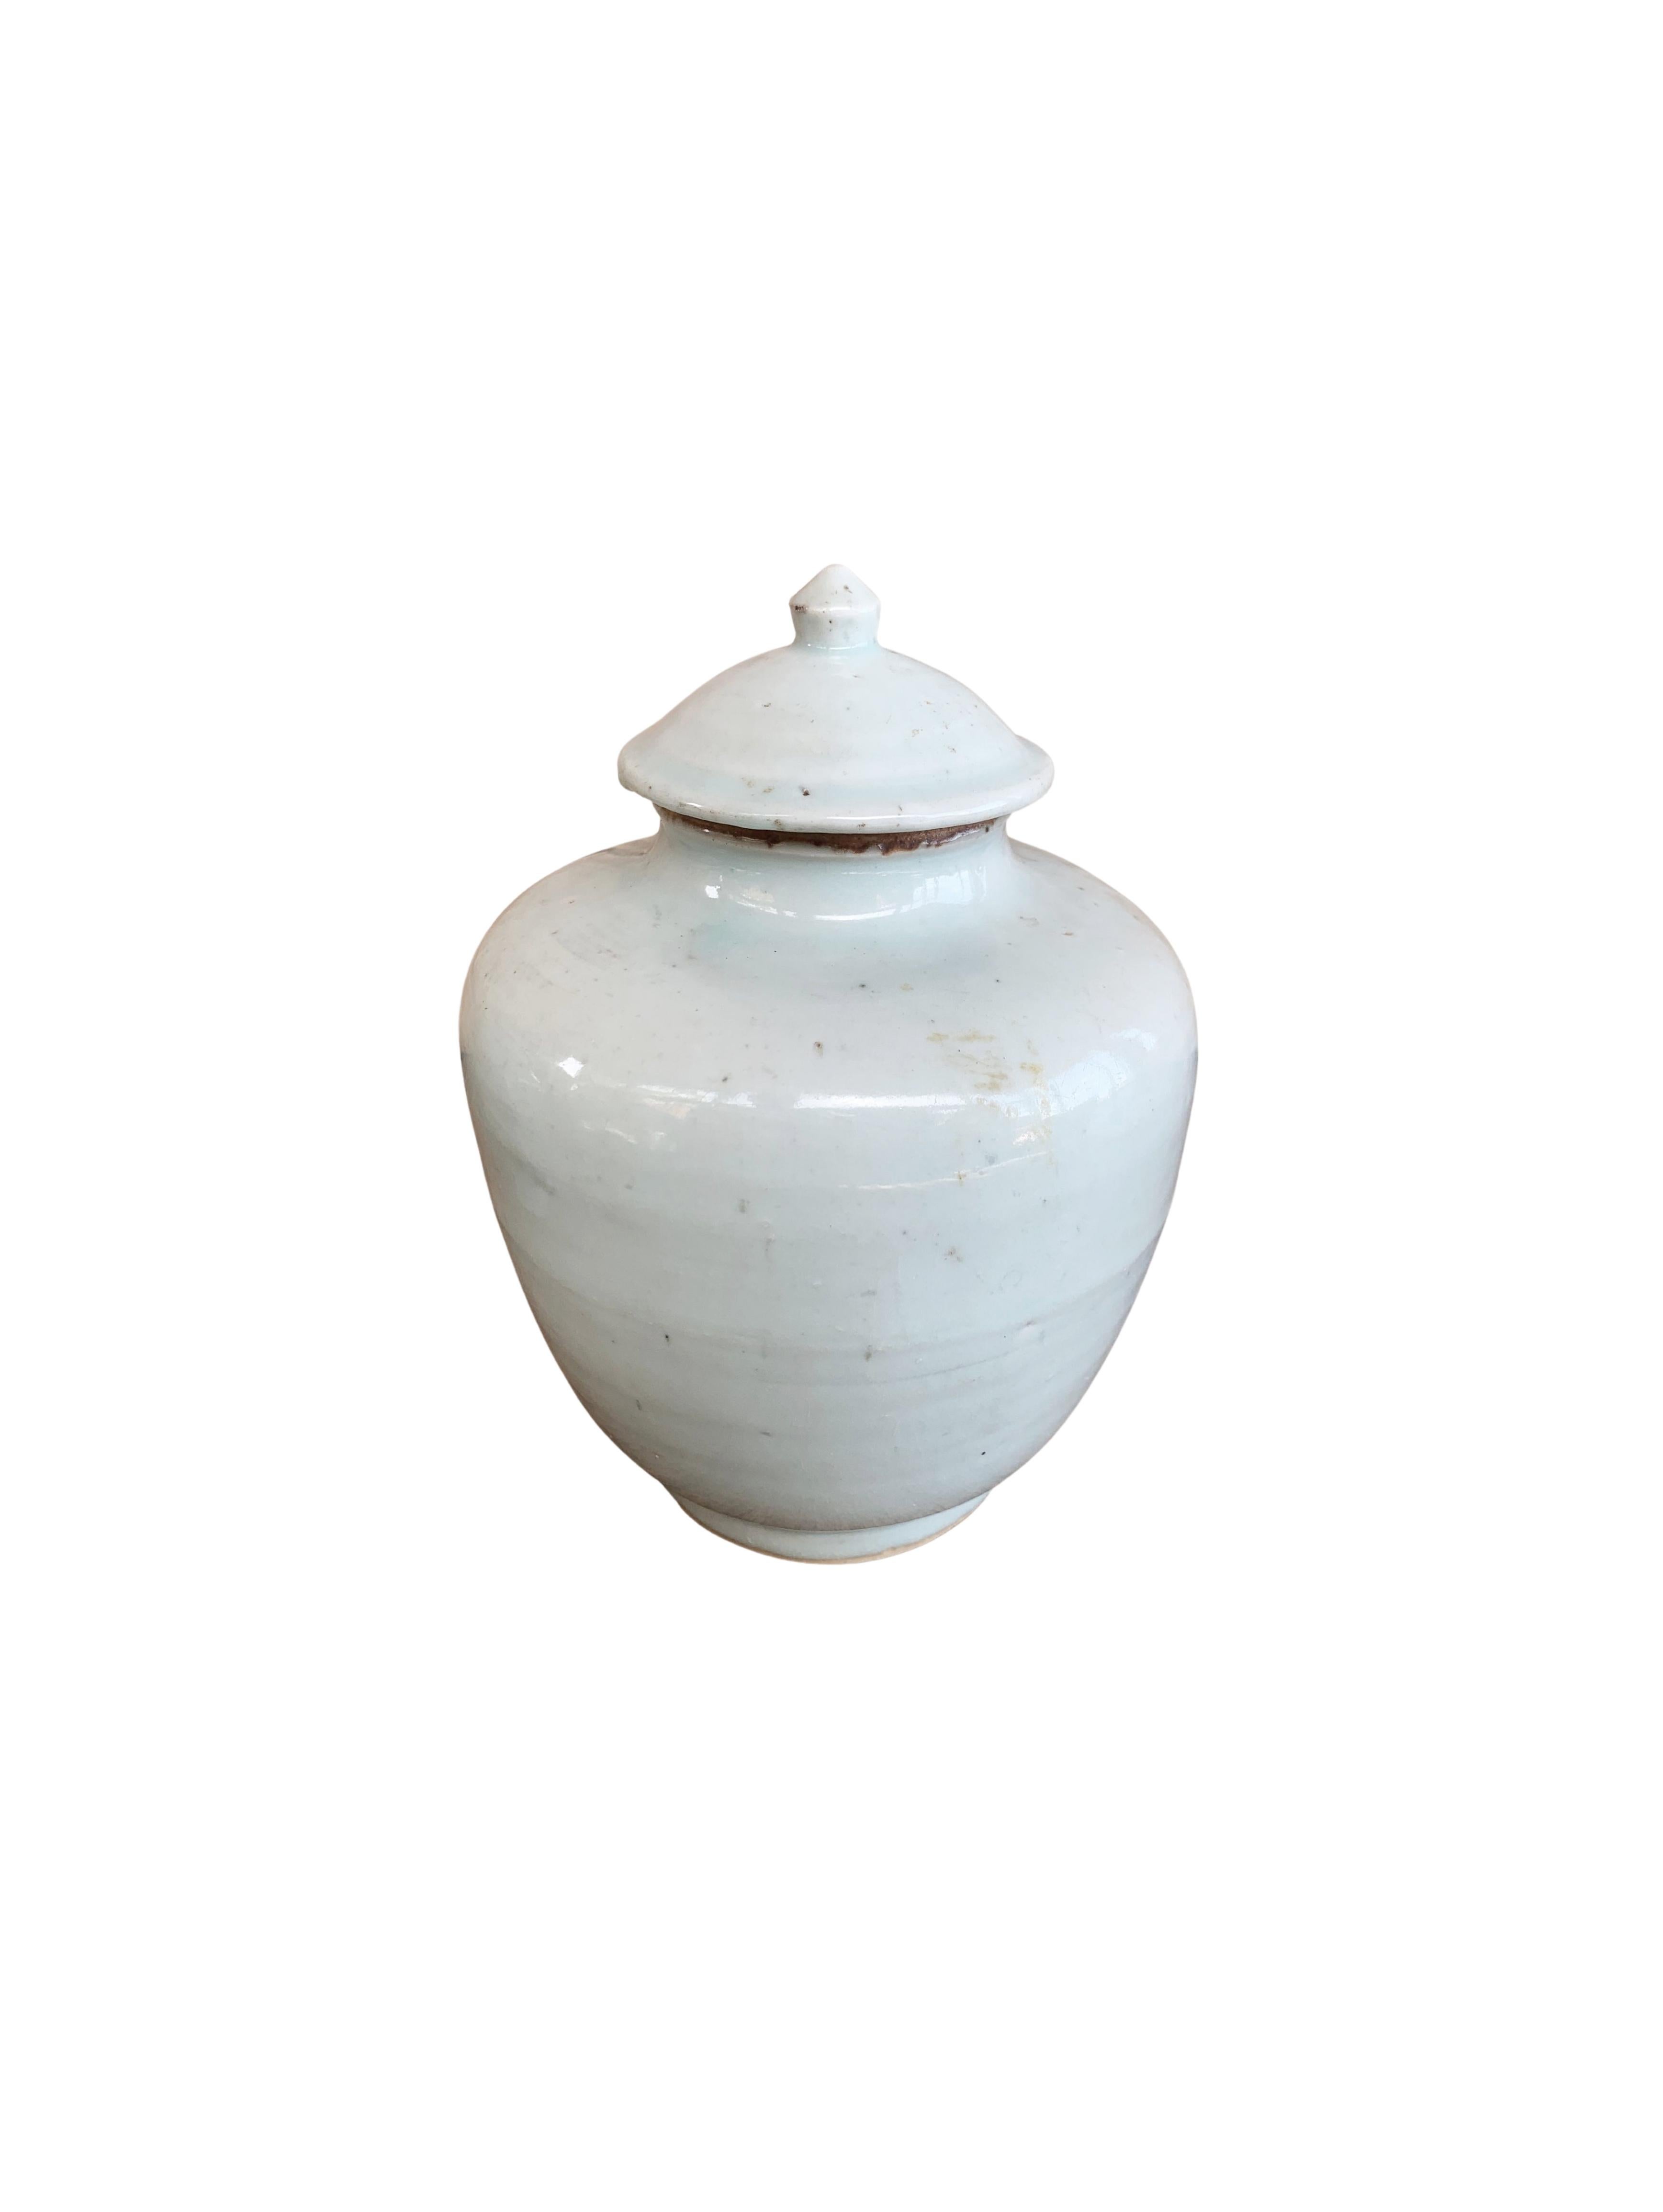 Set of 3 Chinese Off-White Ceramic Ginger Jars In Good Condition For Sale In Jimbaran, Bali